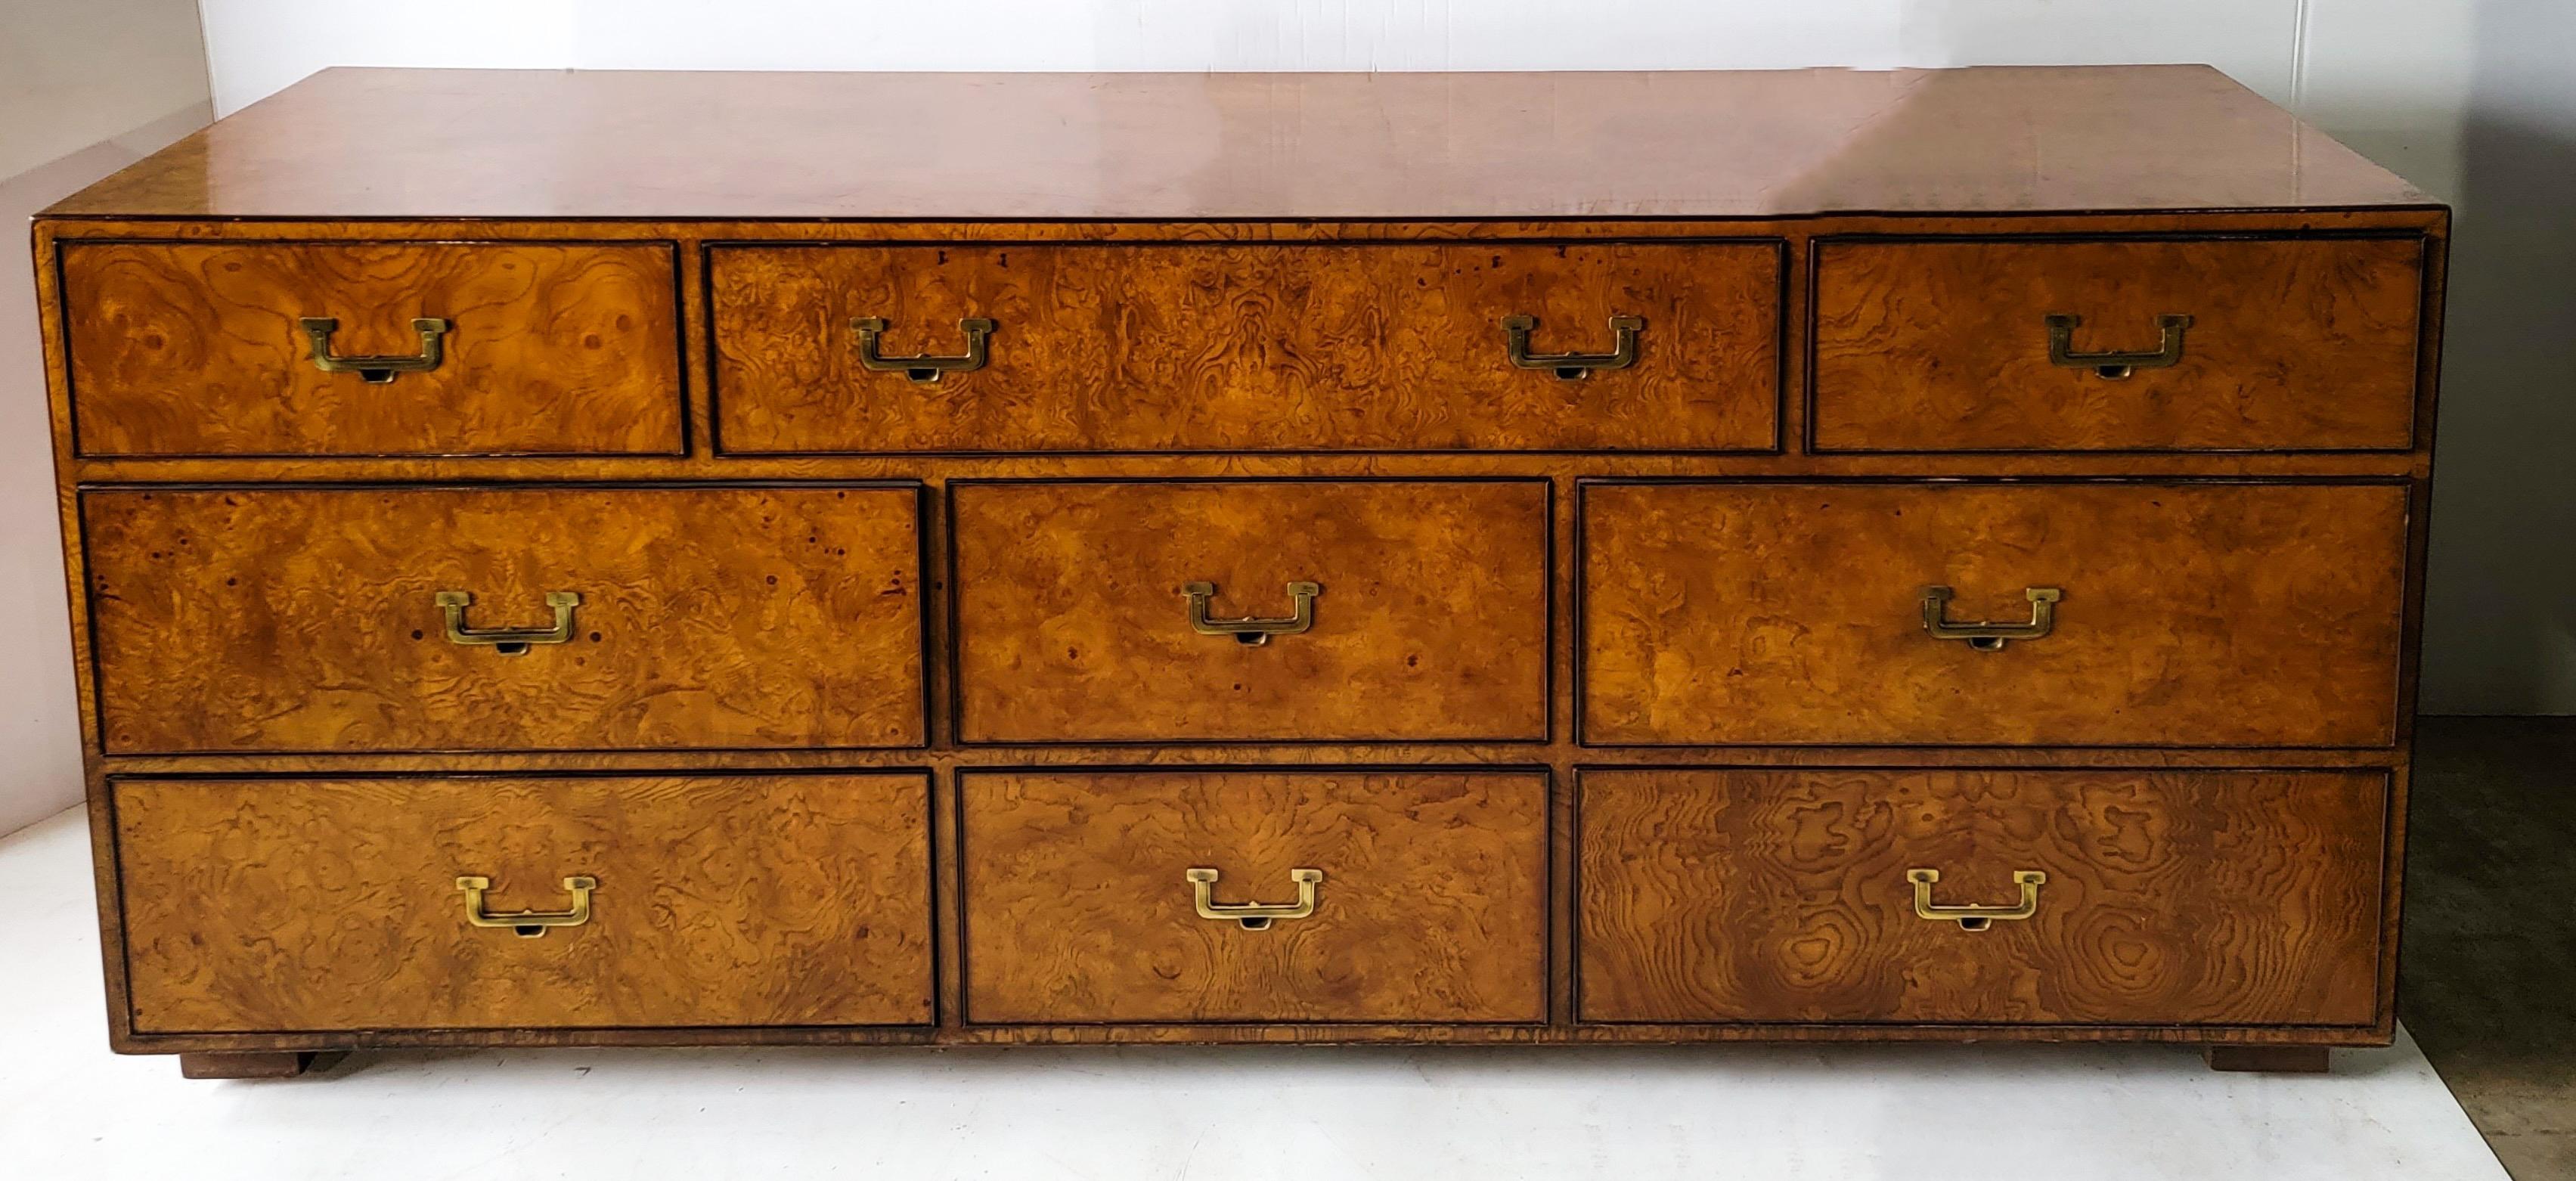 American 1970s John Widdicomb Burlwood Modern Campaign Style Credenza / Chest of Drawers